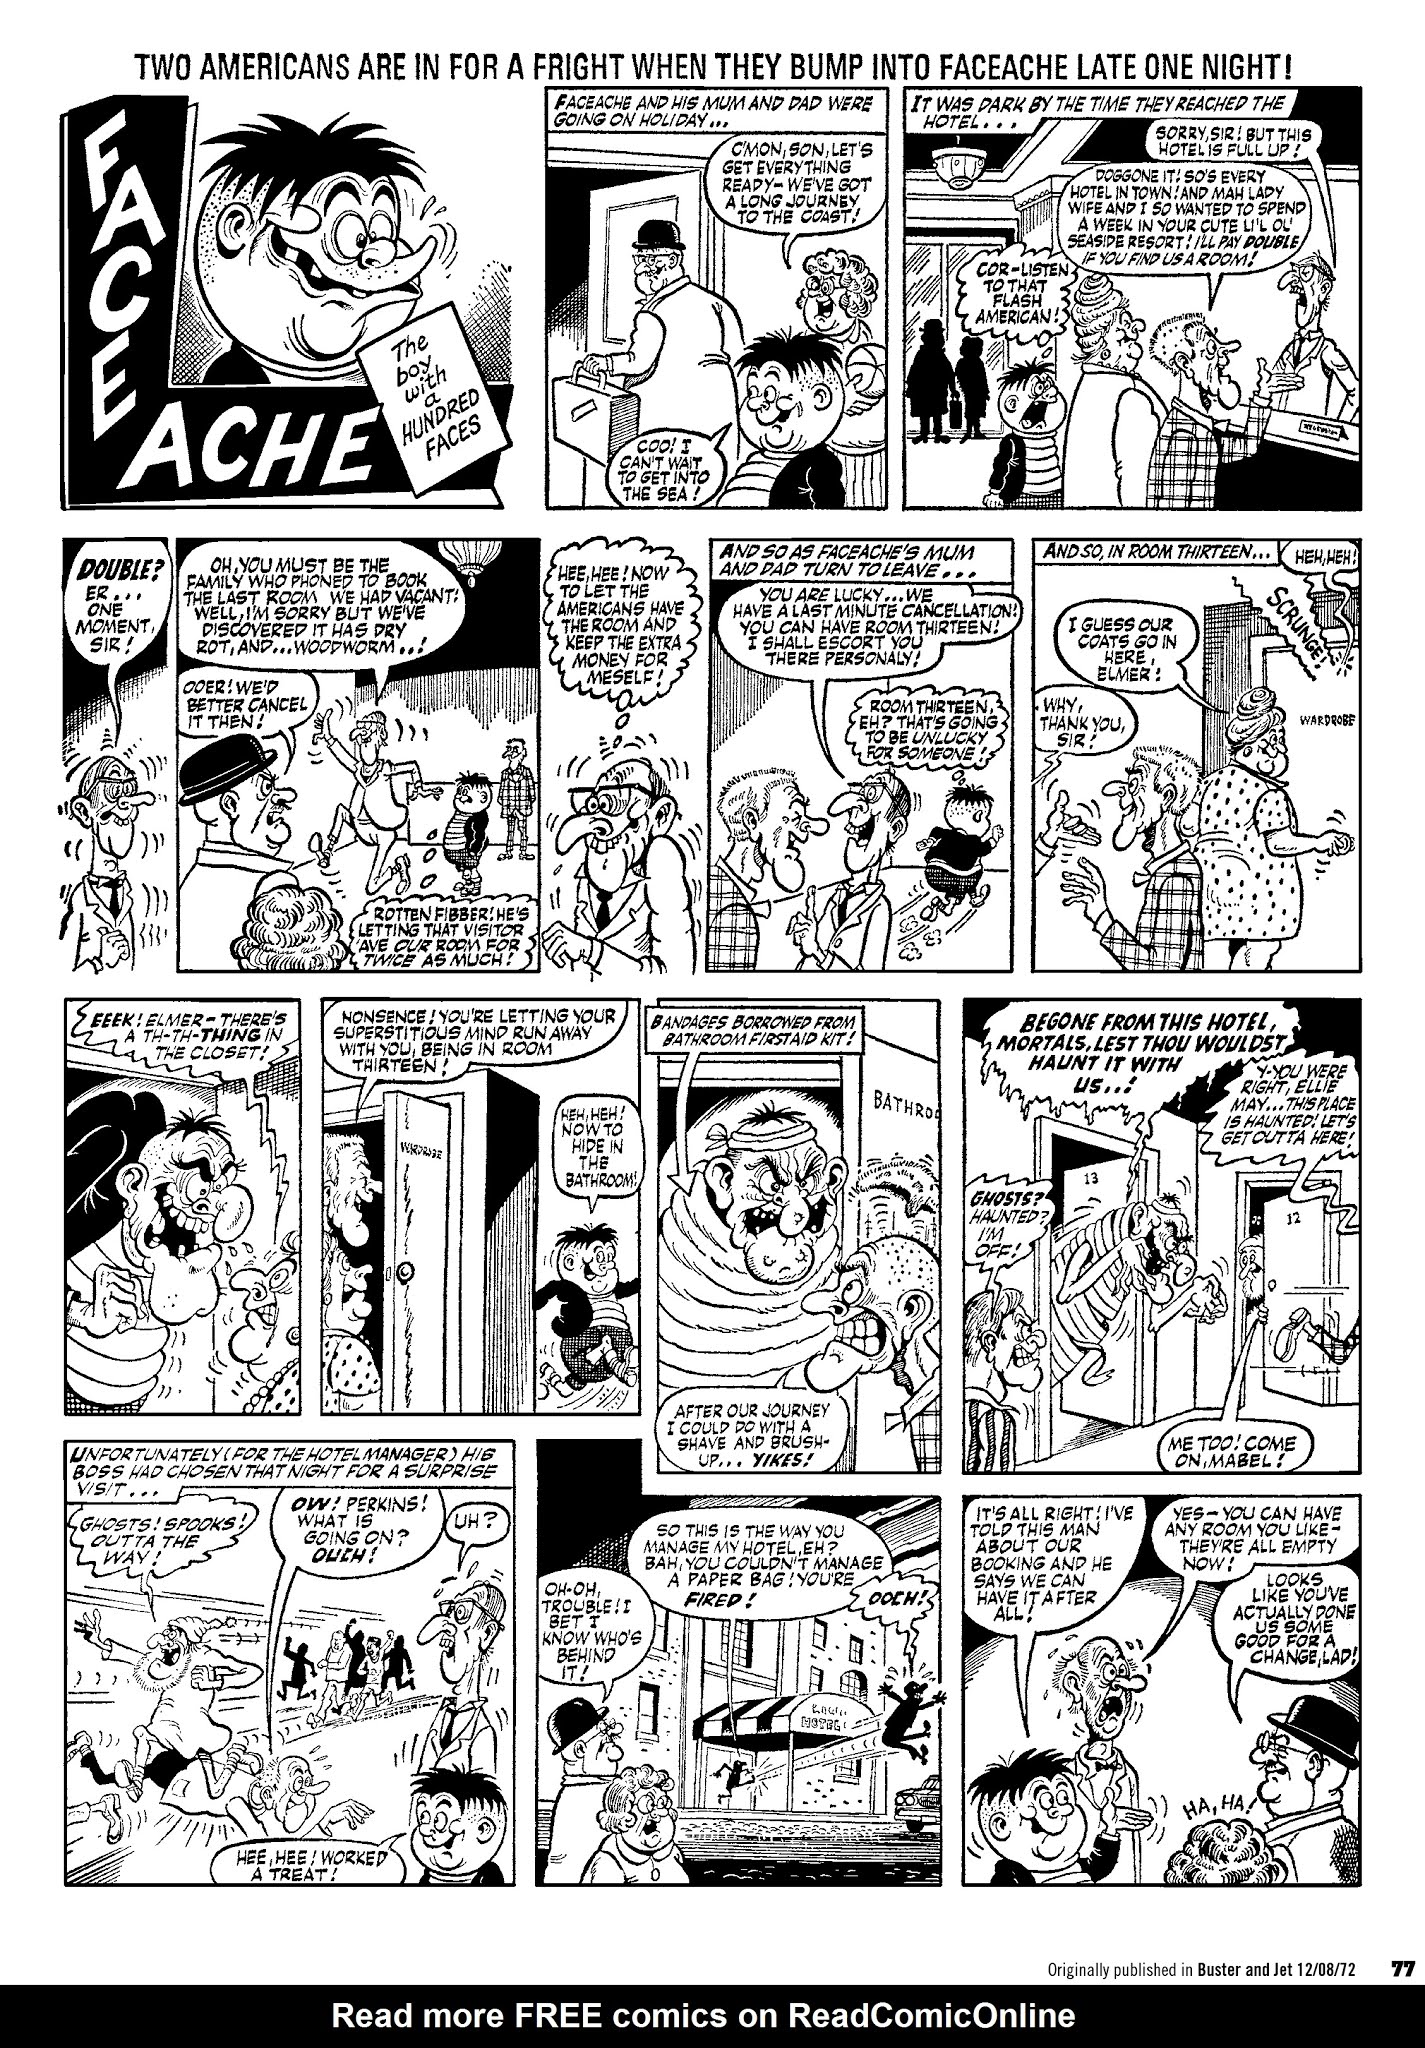 Read online Faceache: The First Hundred Scrunges comic -  Issue # TPB 1 - 79